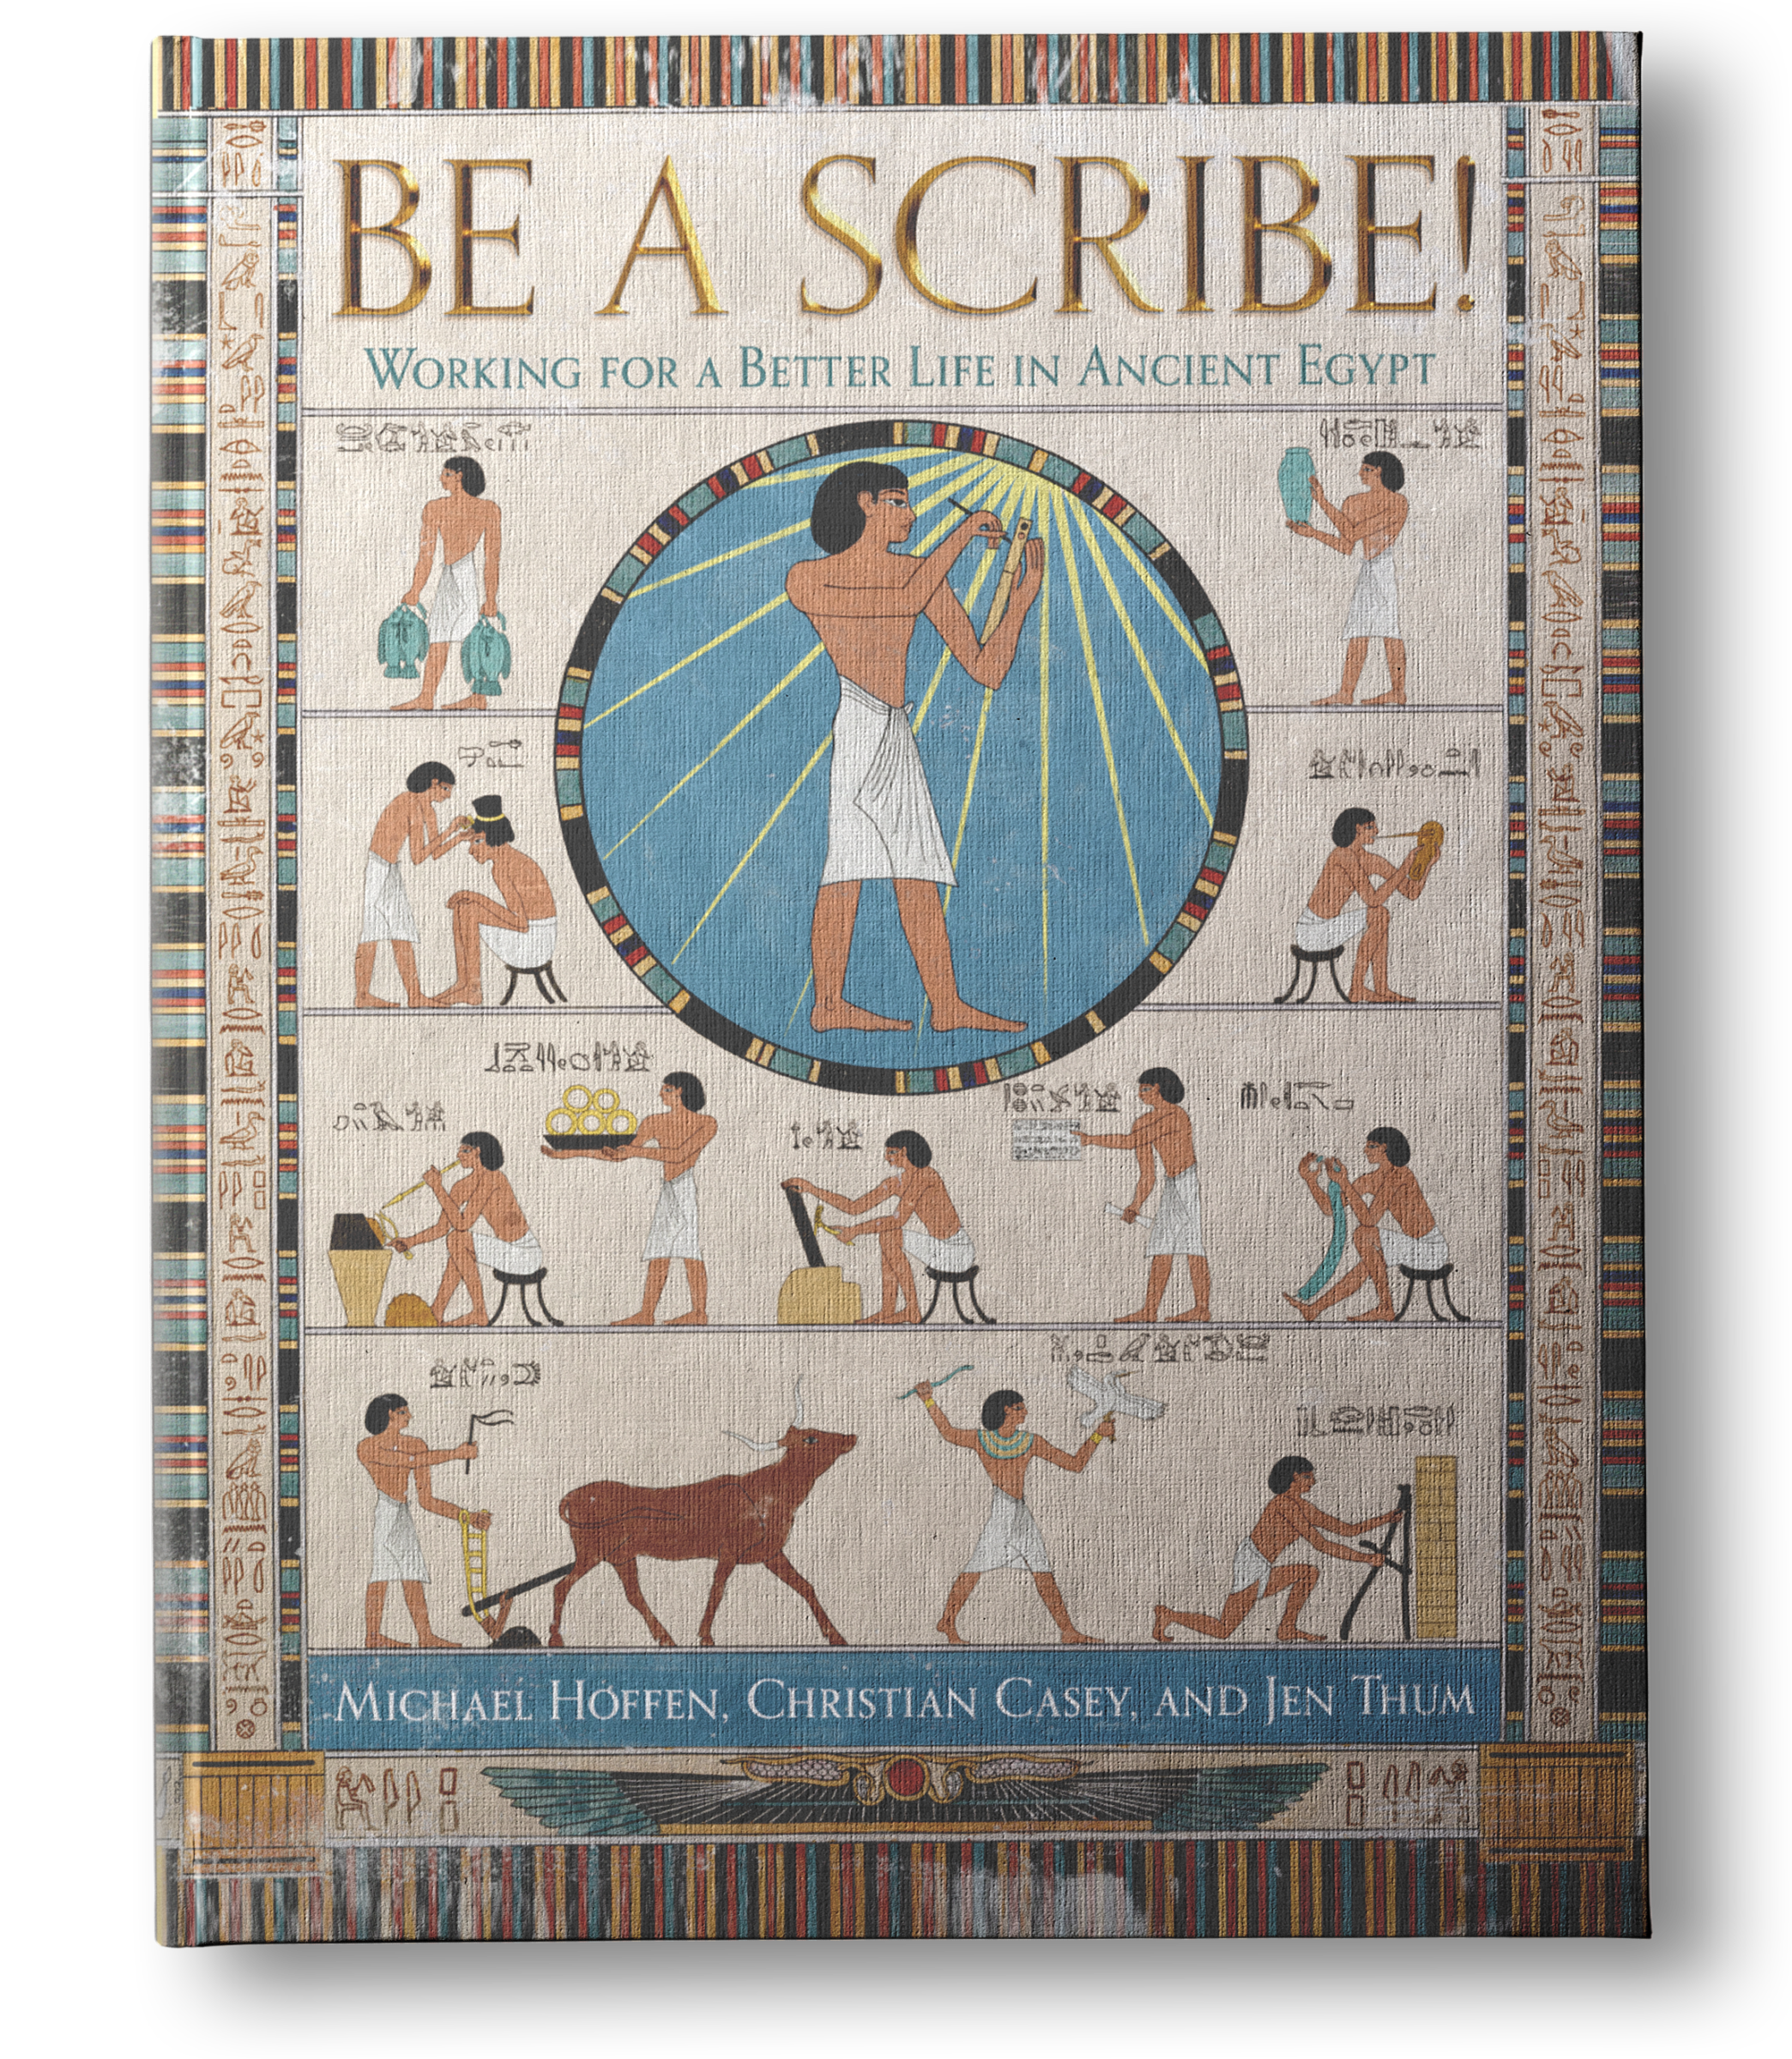 BE A SCRIBE!: Working for a Better Life in Ancient Egypt